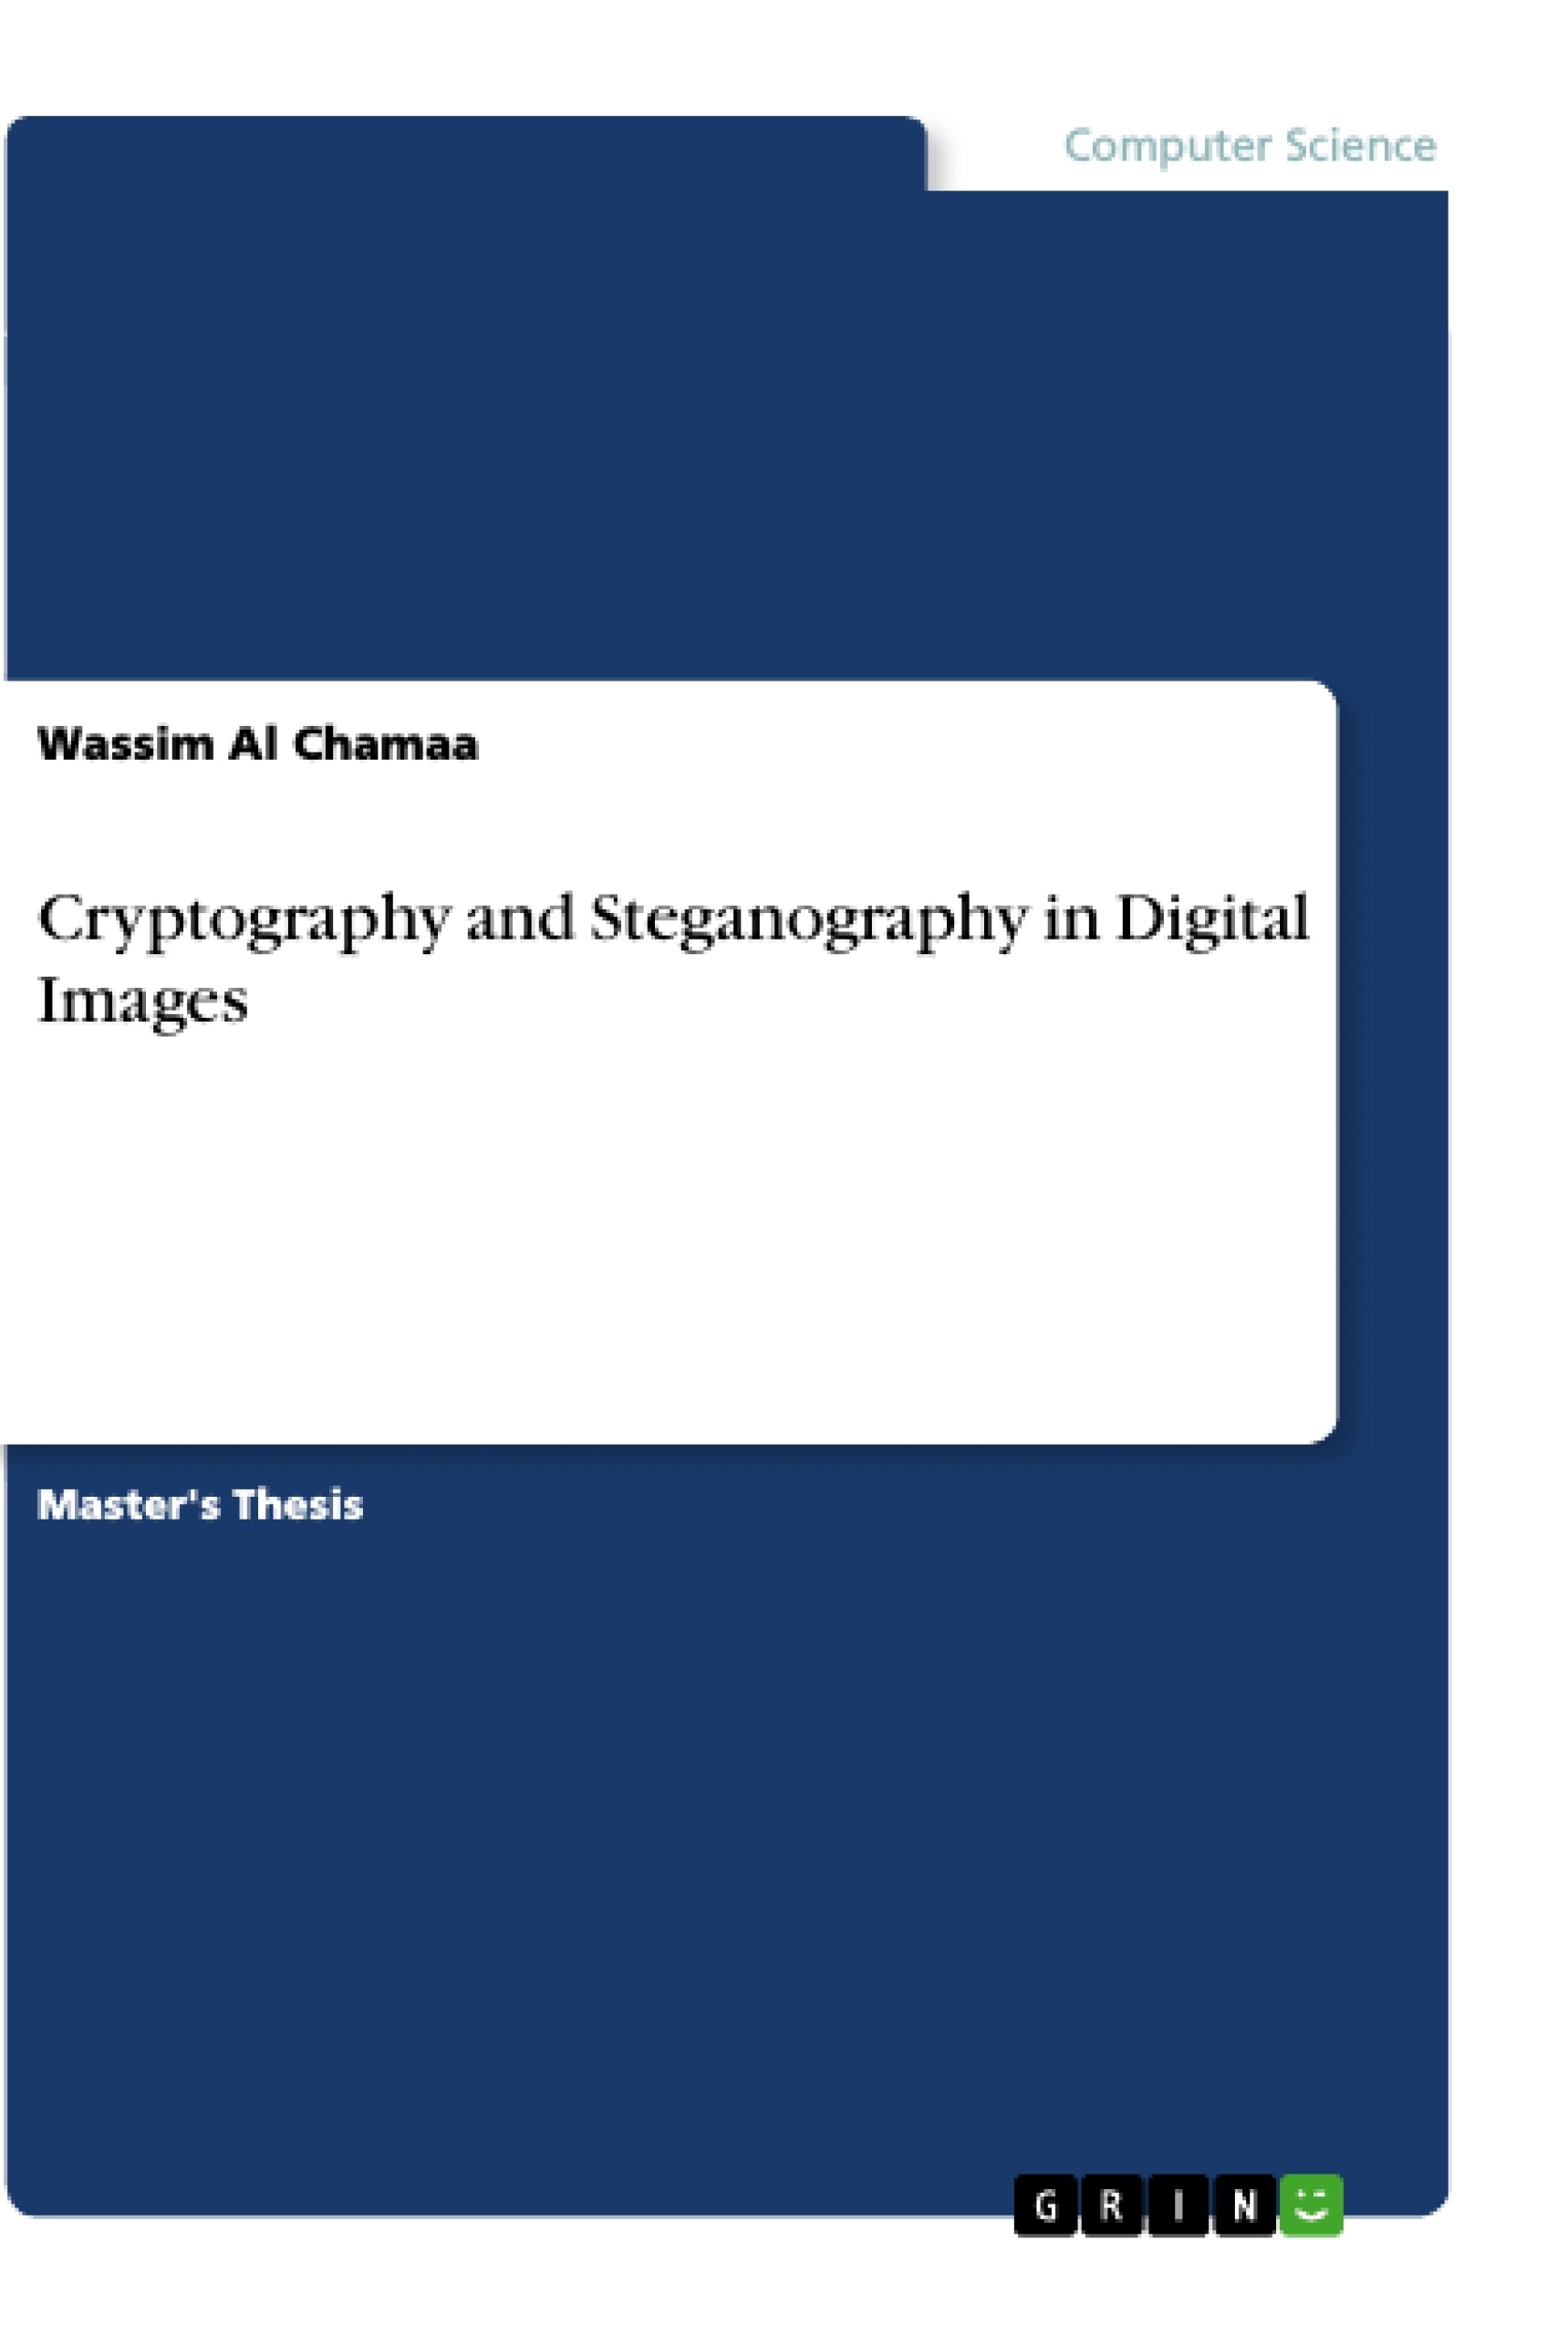 Título: Cryptography and Steganography in Digital Images